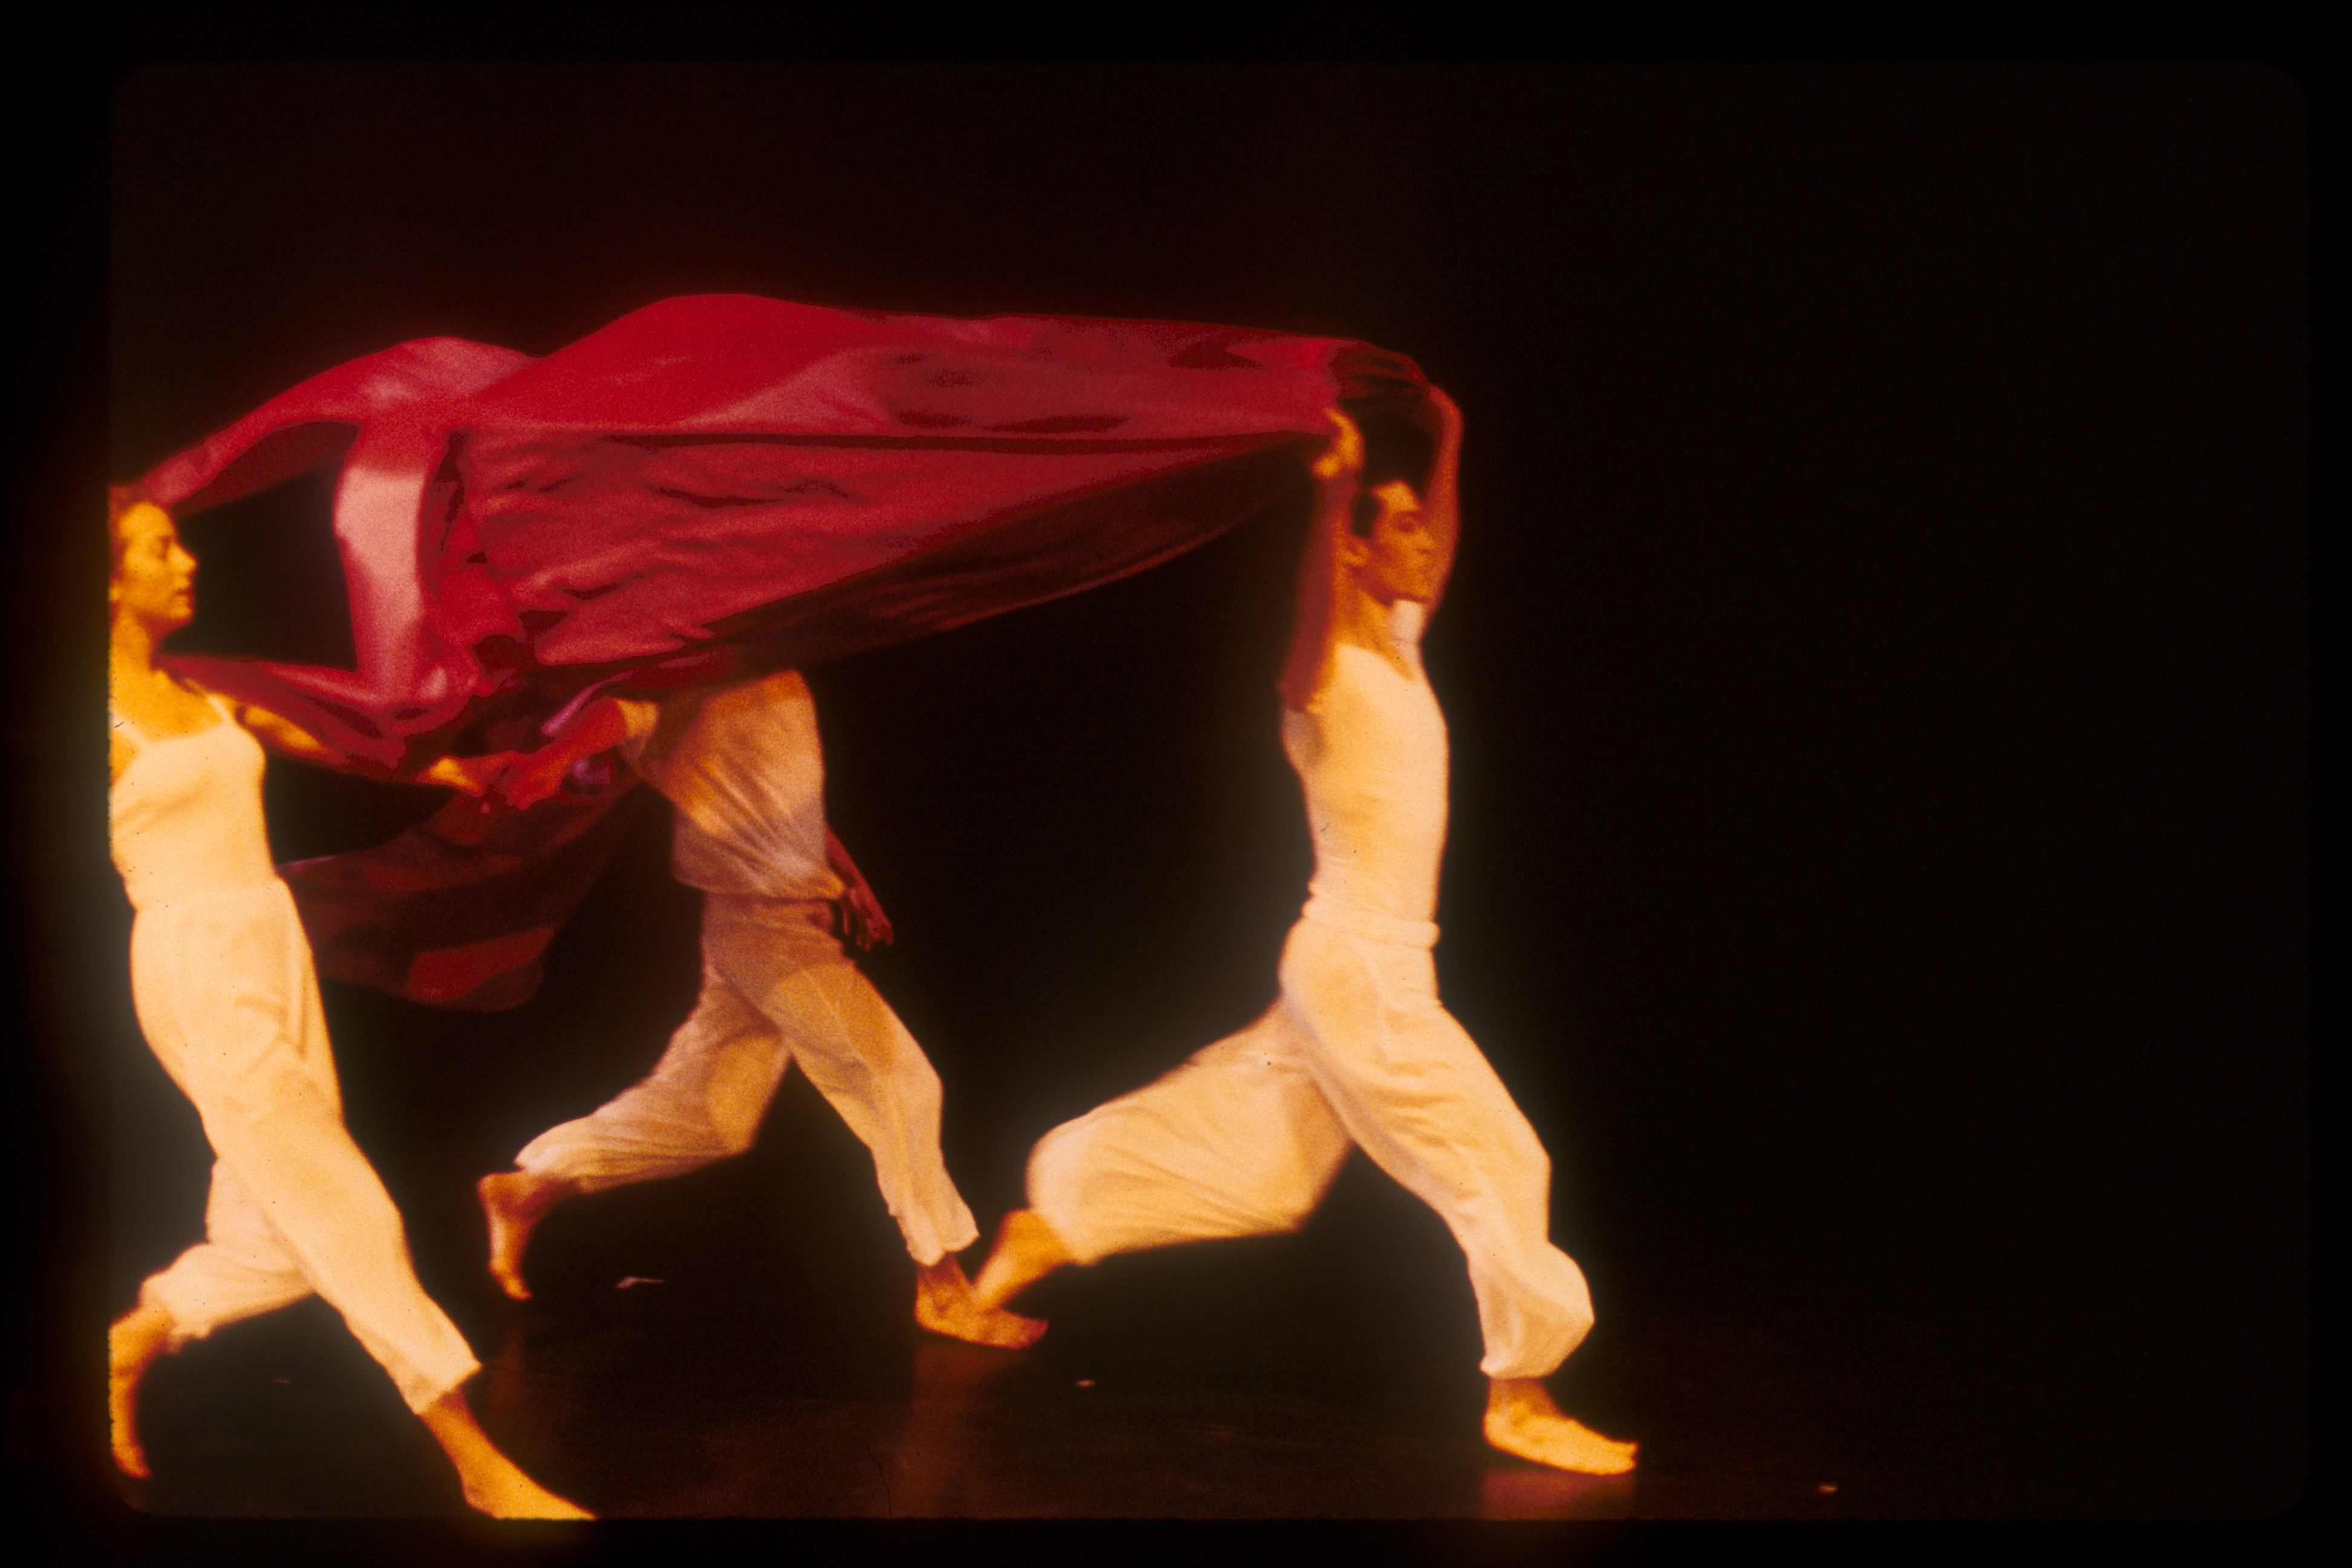 3 dancers running with red fabric - slide